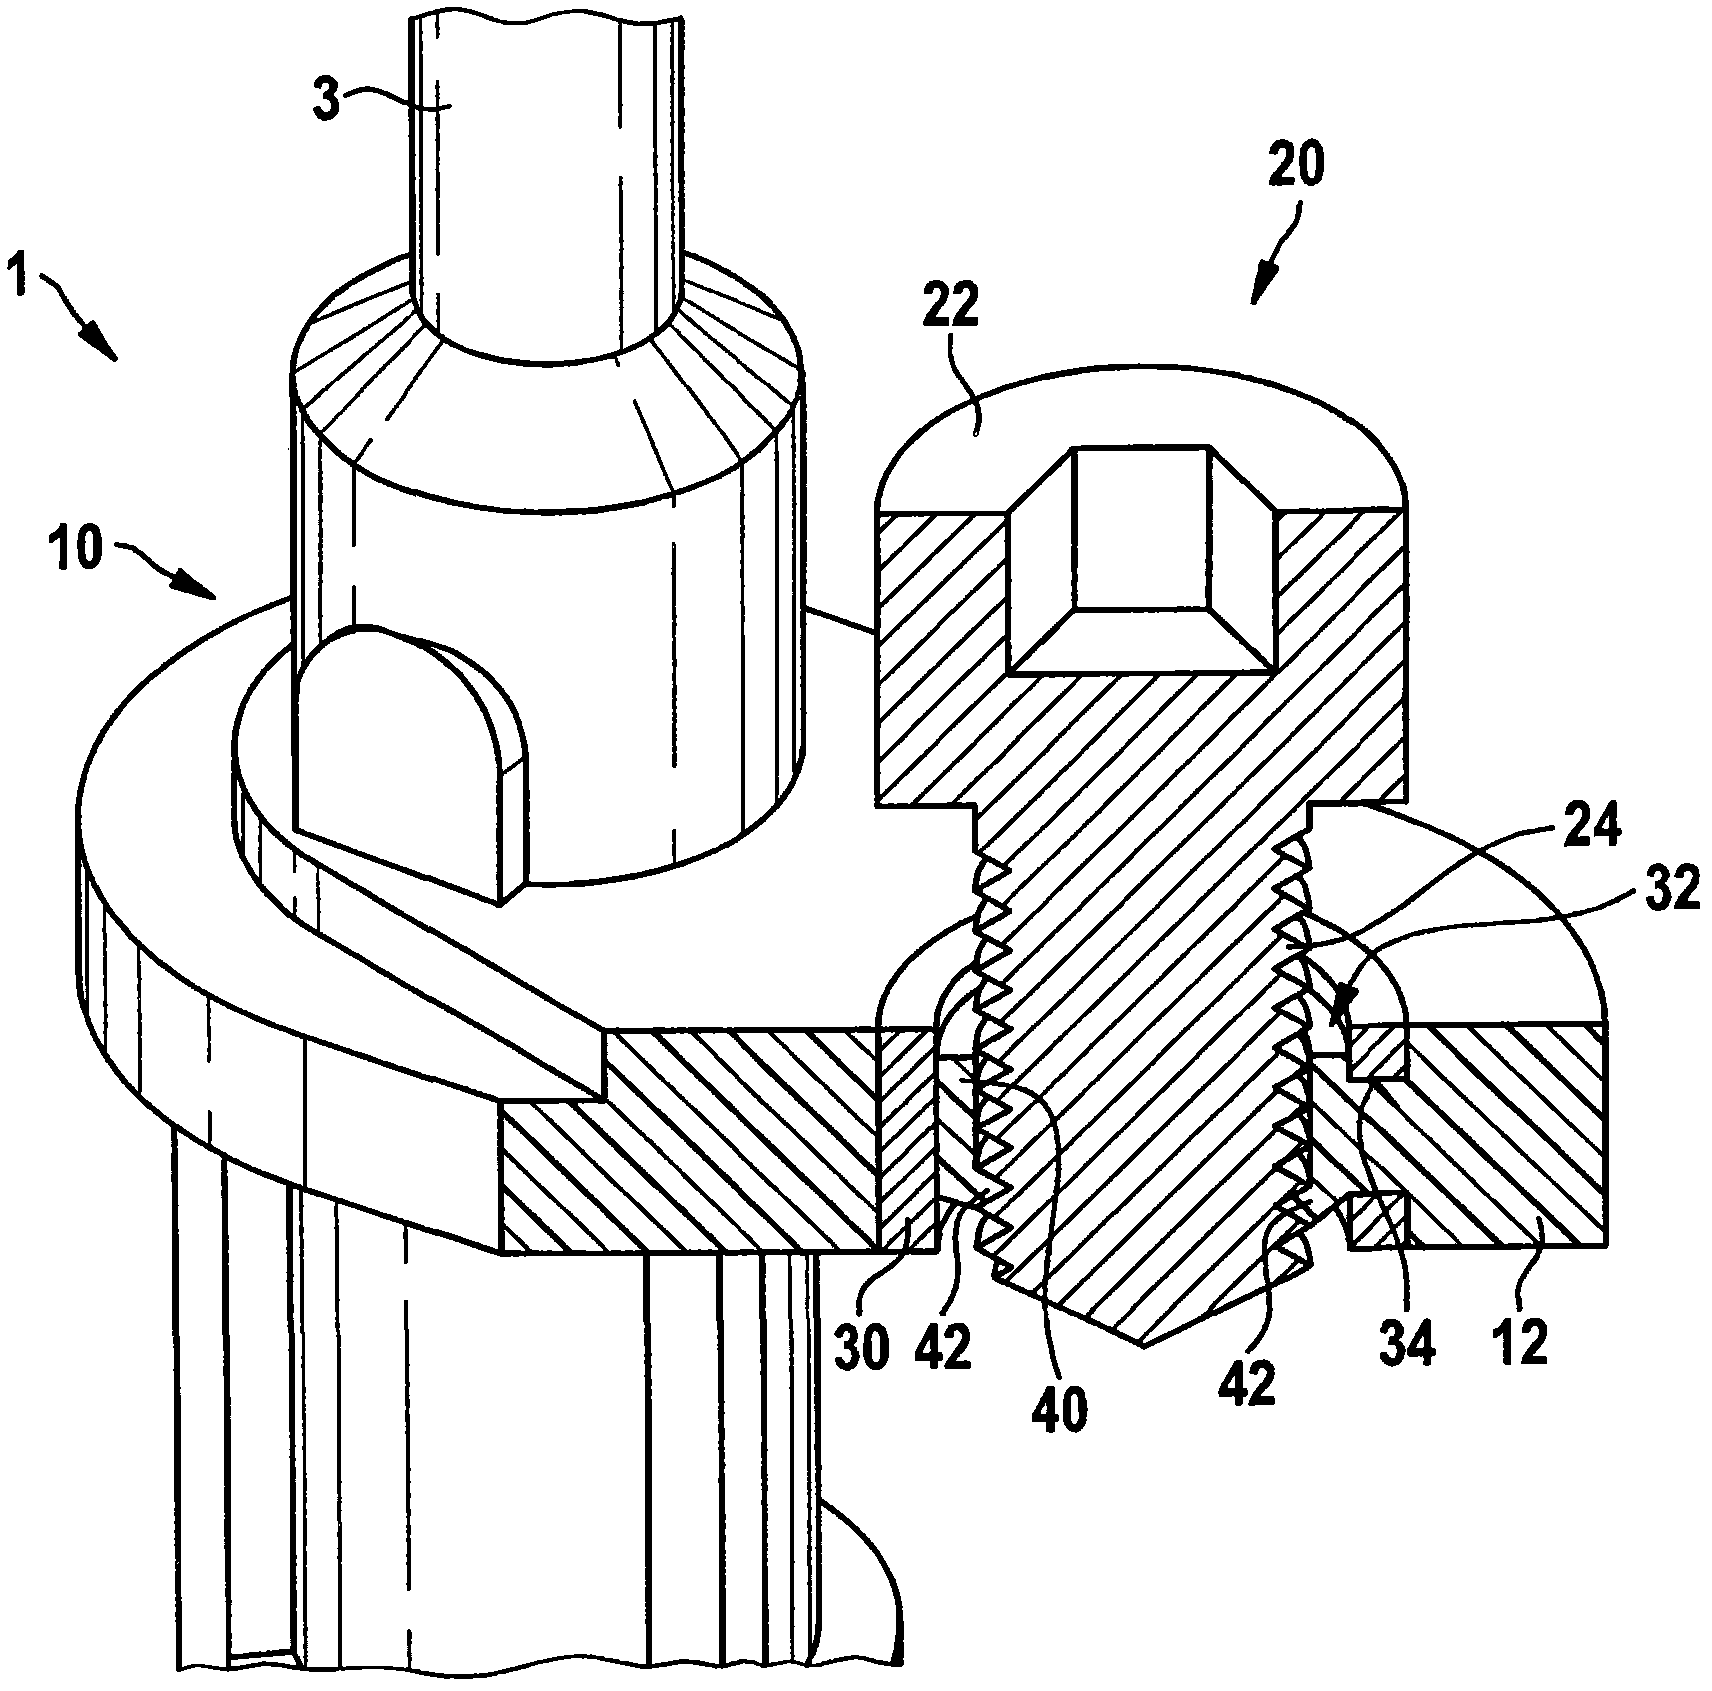 Structure of a build-in screw in a bushing and corresponding sensor housing